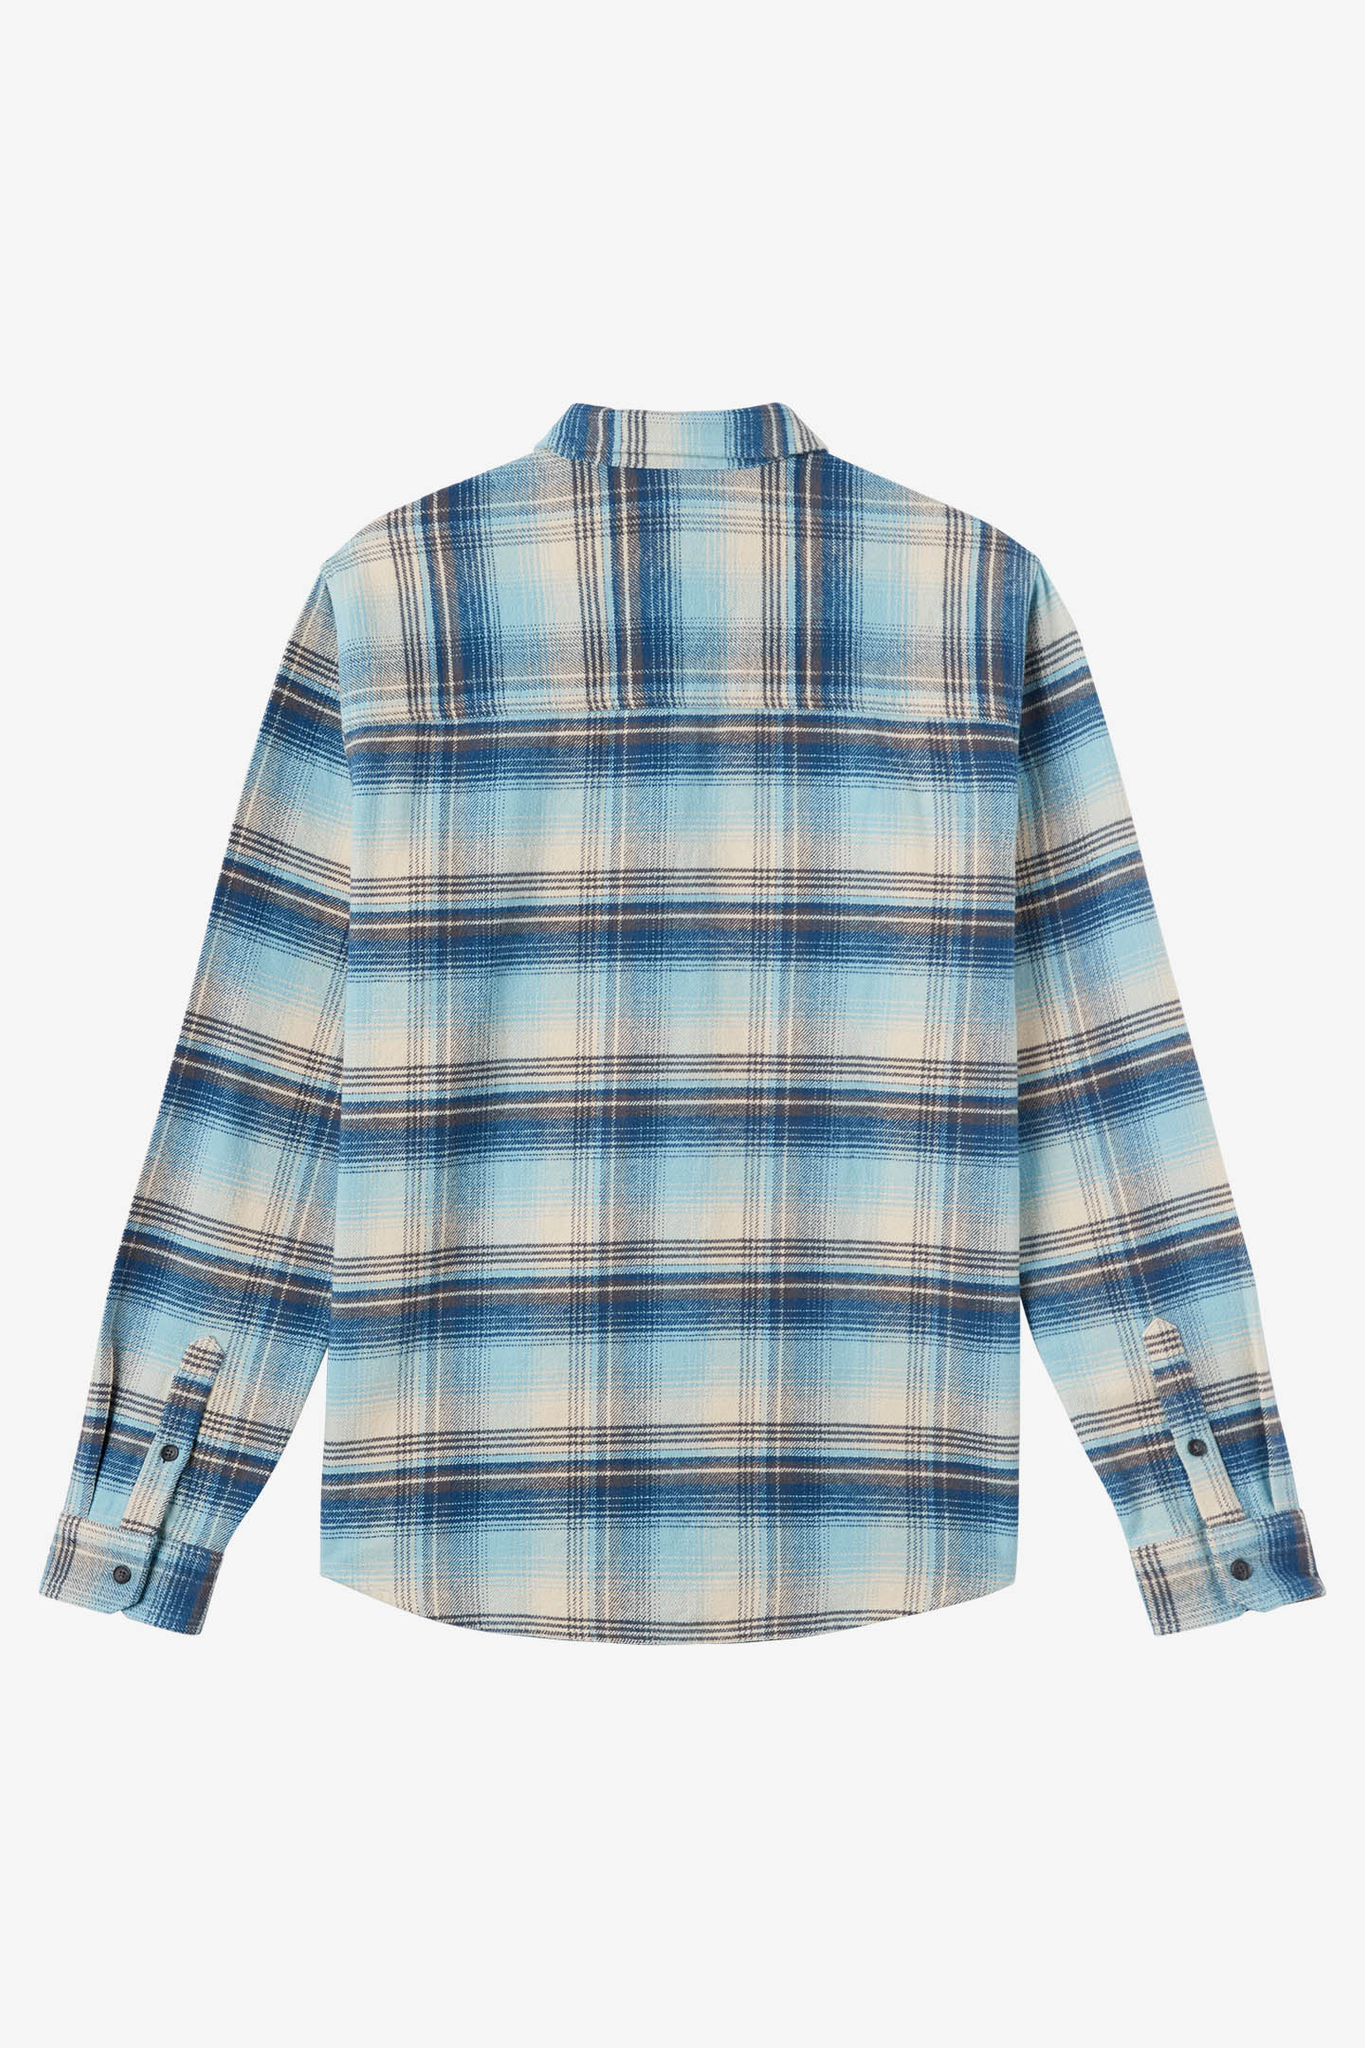 EAST CLIFF HEAVY WEIGHT FLANNEL SHIRT